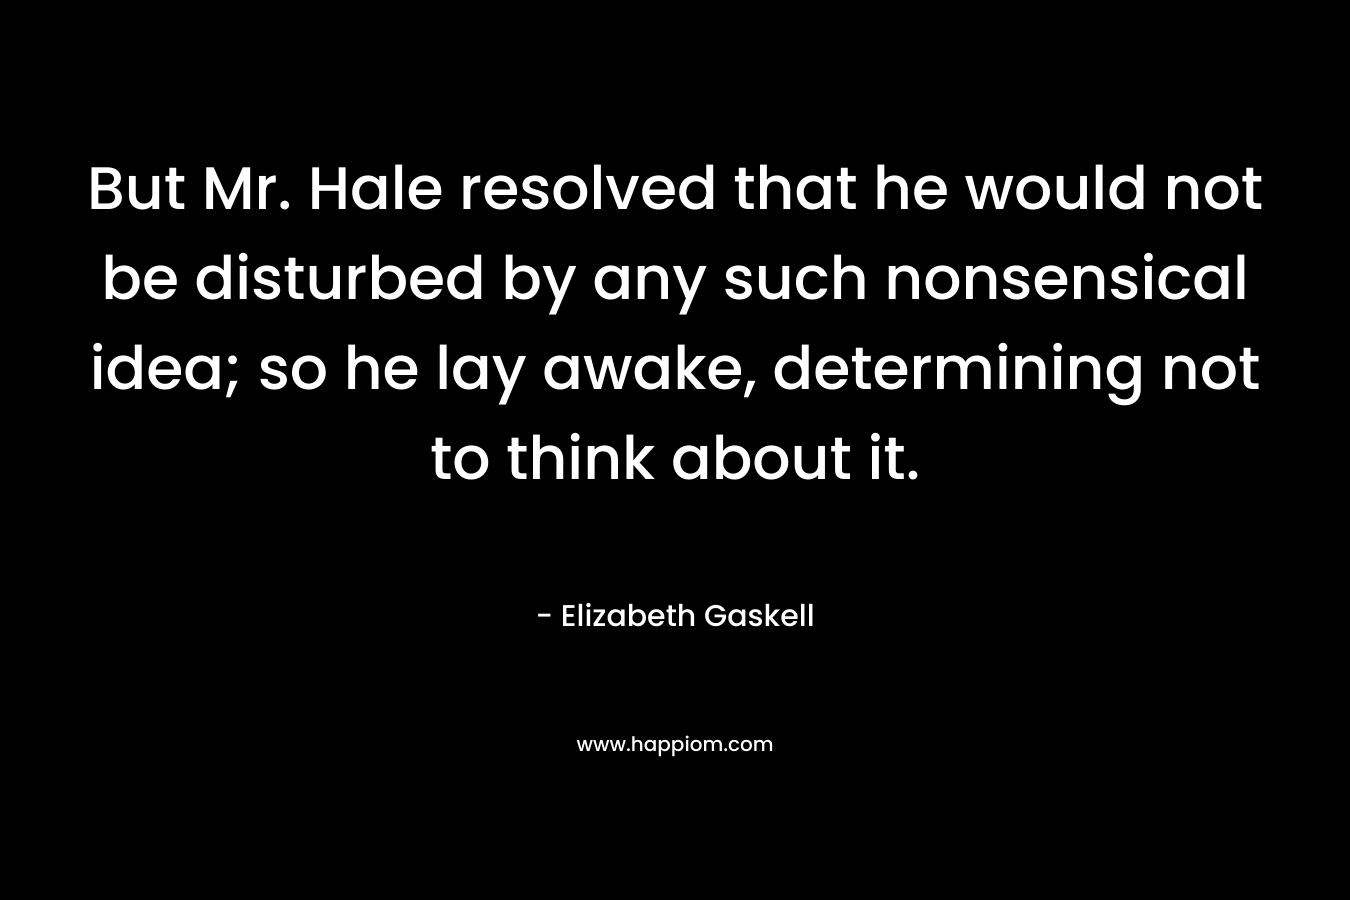 But Mr. Hale resolved that he would not be disturbed by any such nonsensical idea; so he lay awake, determining not to think about it. – Elizabeth Gaskell